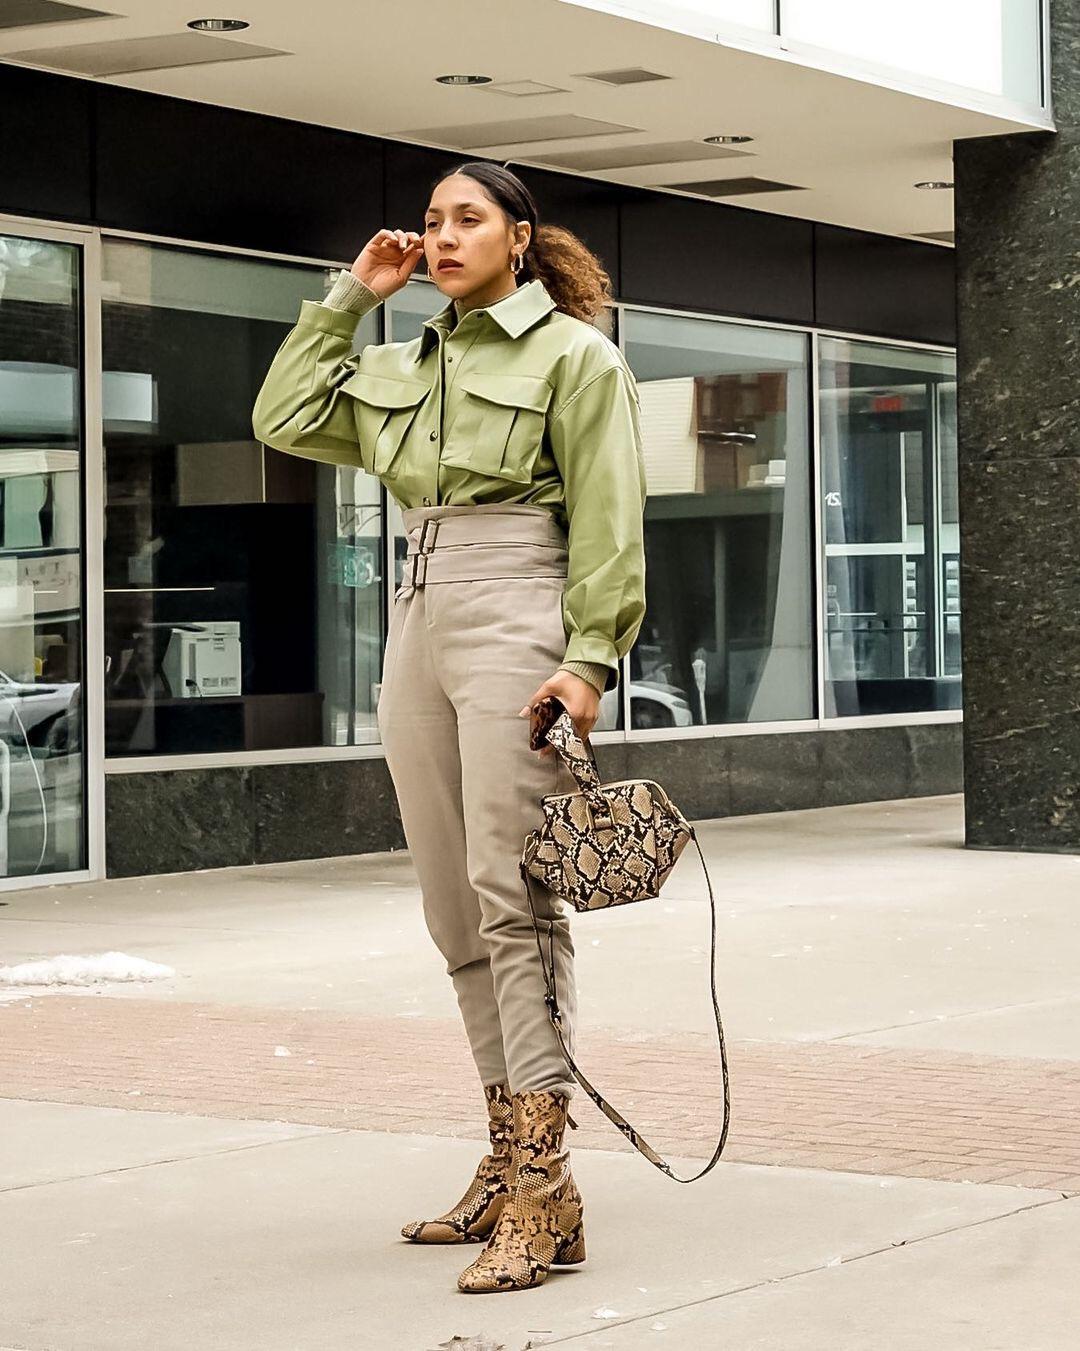 Detroit Fashion Blogger, Jordan Blackwell, On Inspiring Women to Look ‘damn’ Good in A Stereotyped Society